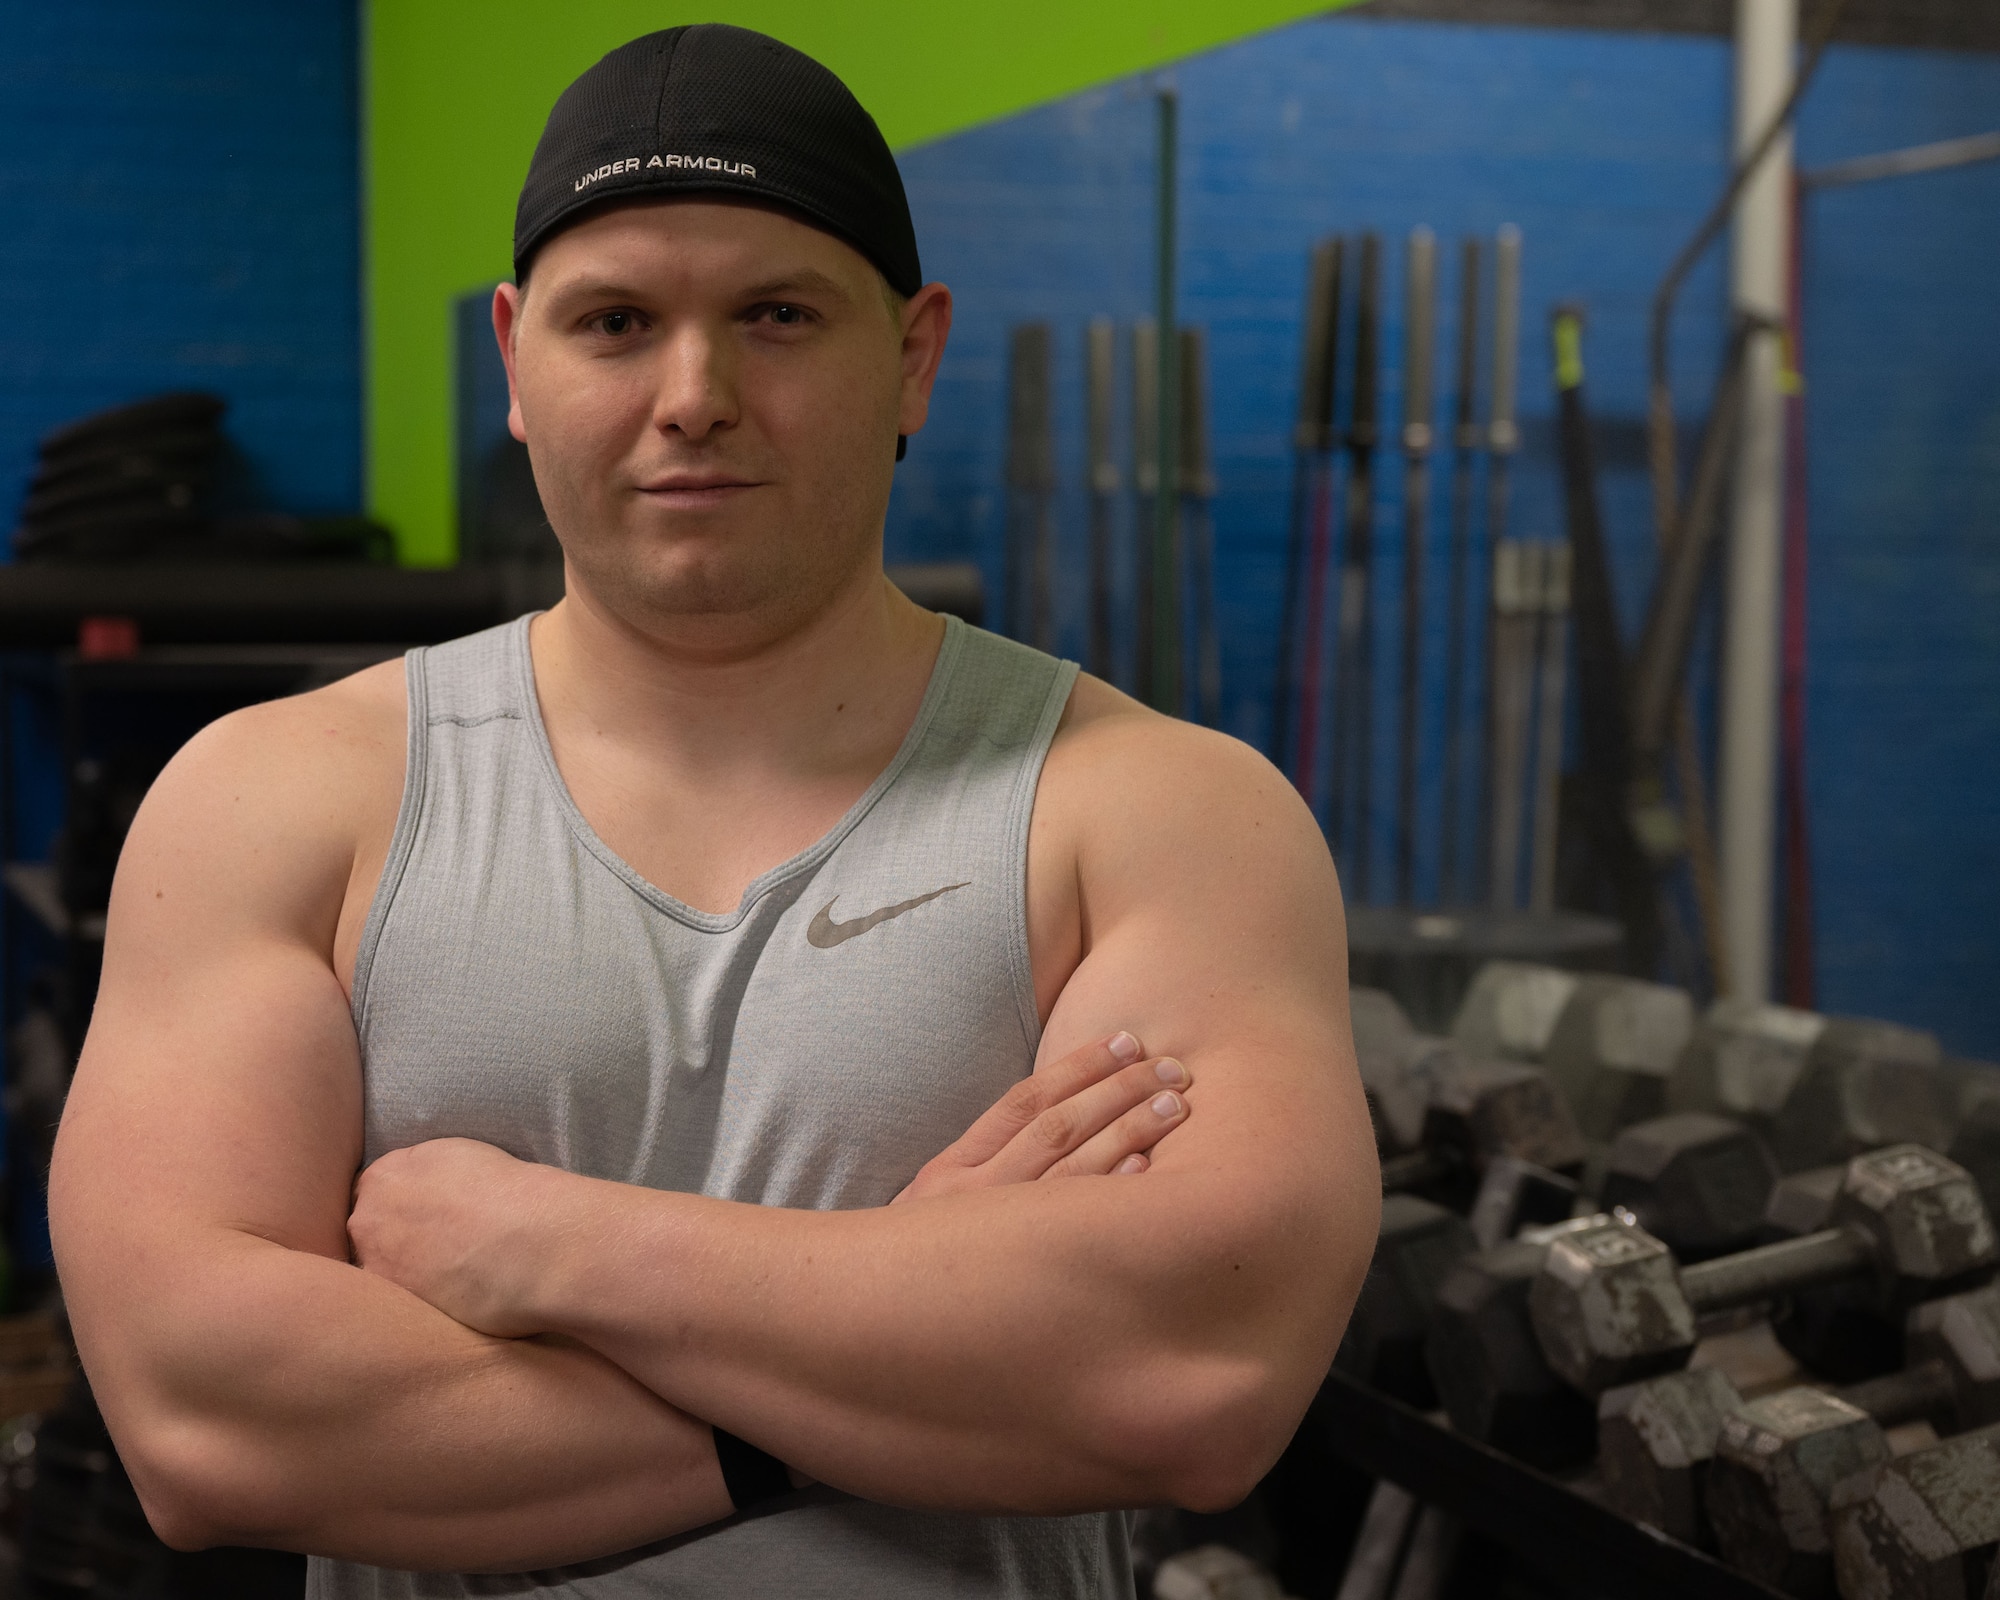 U.S. Air Force Master Sgt. Dalton Grainger, 316th Training Squadron instructor, poses at his local gym, San Angelo, Texas,  January 12, 2022. Grainger has been working on his cardio to prepare for his upcoming fitness assessment. (U.S. Air Force photo by Senior Airman Michael Bowman)